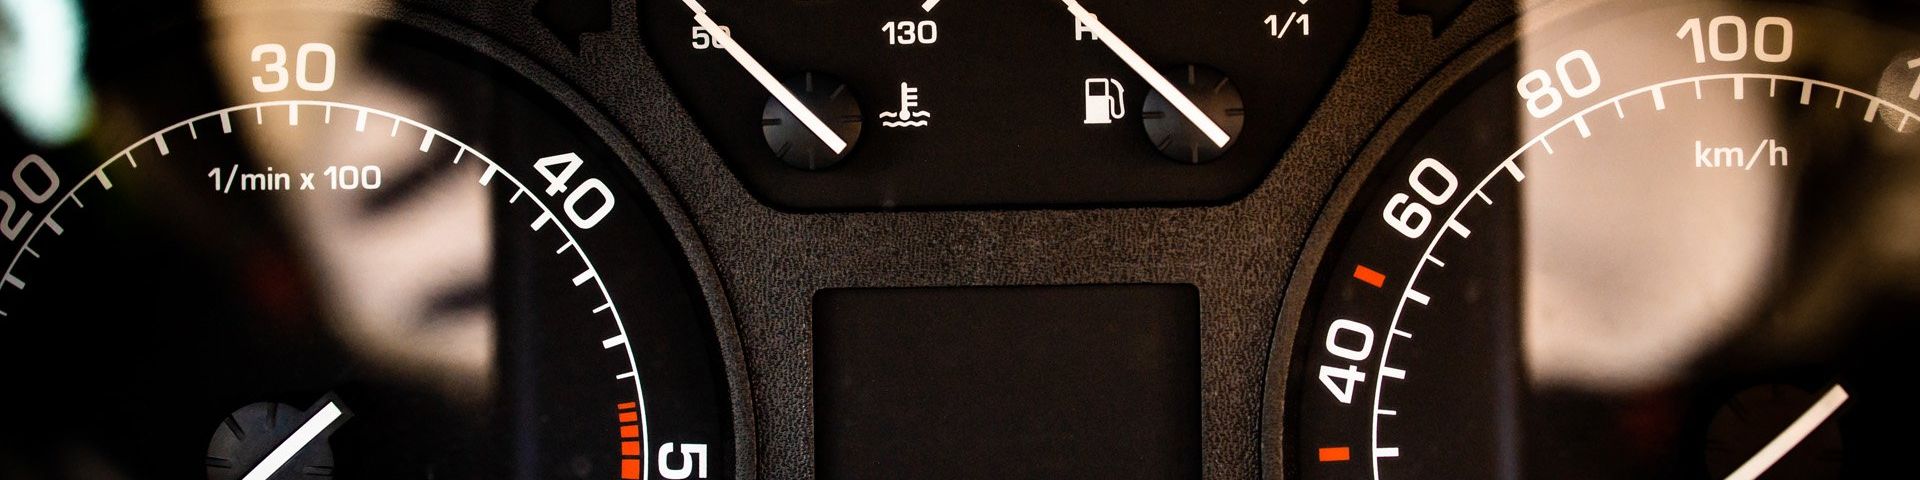 A close up of the tops of the left and right speedometers in a car. The fuel gauge is partially cut off.